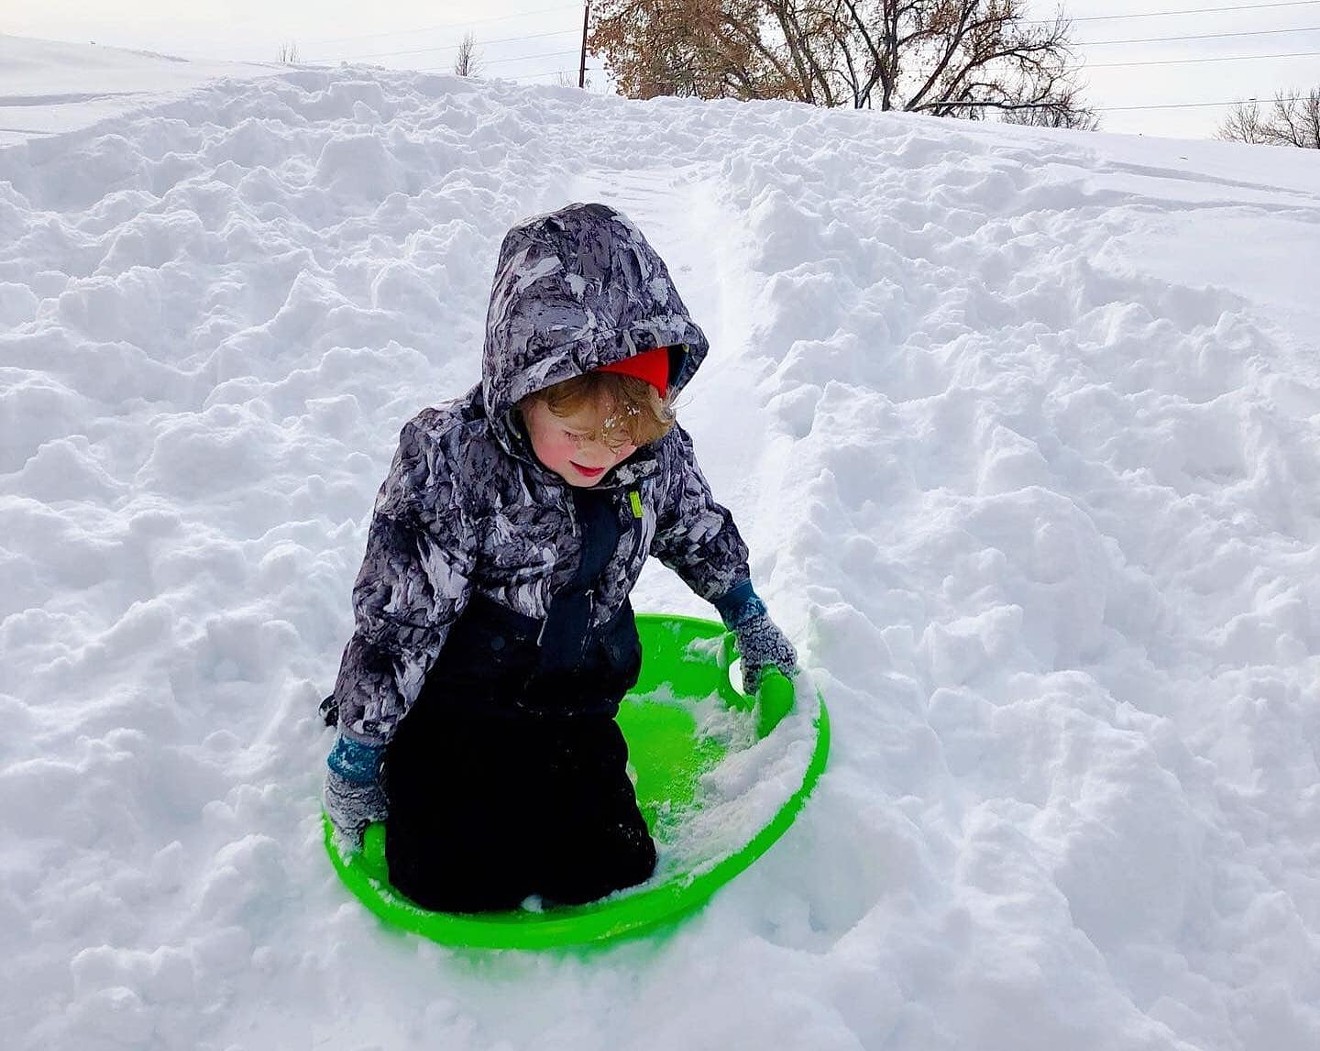 Grab a sled and get on a snowy hill!